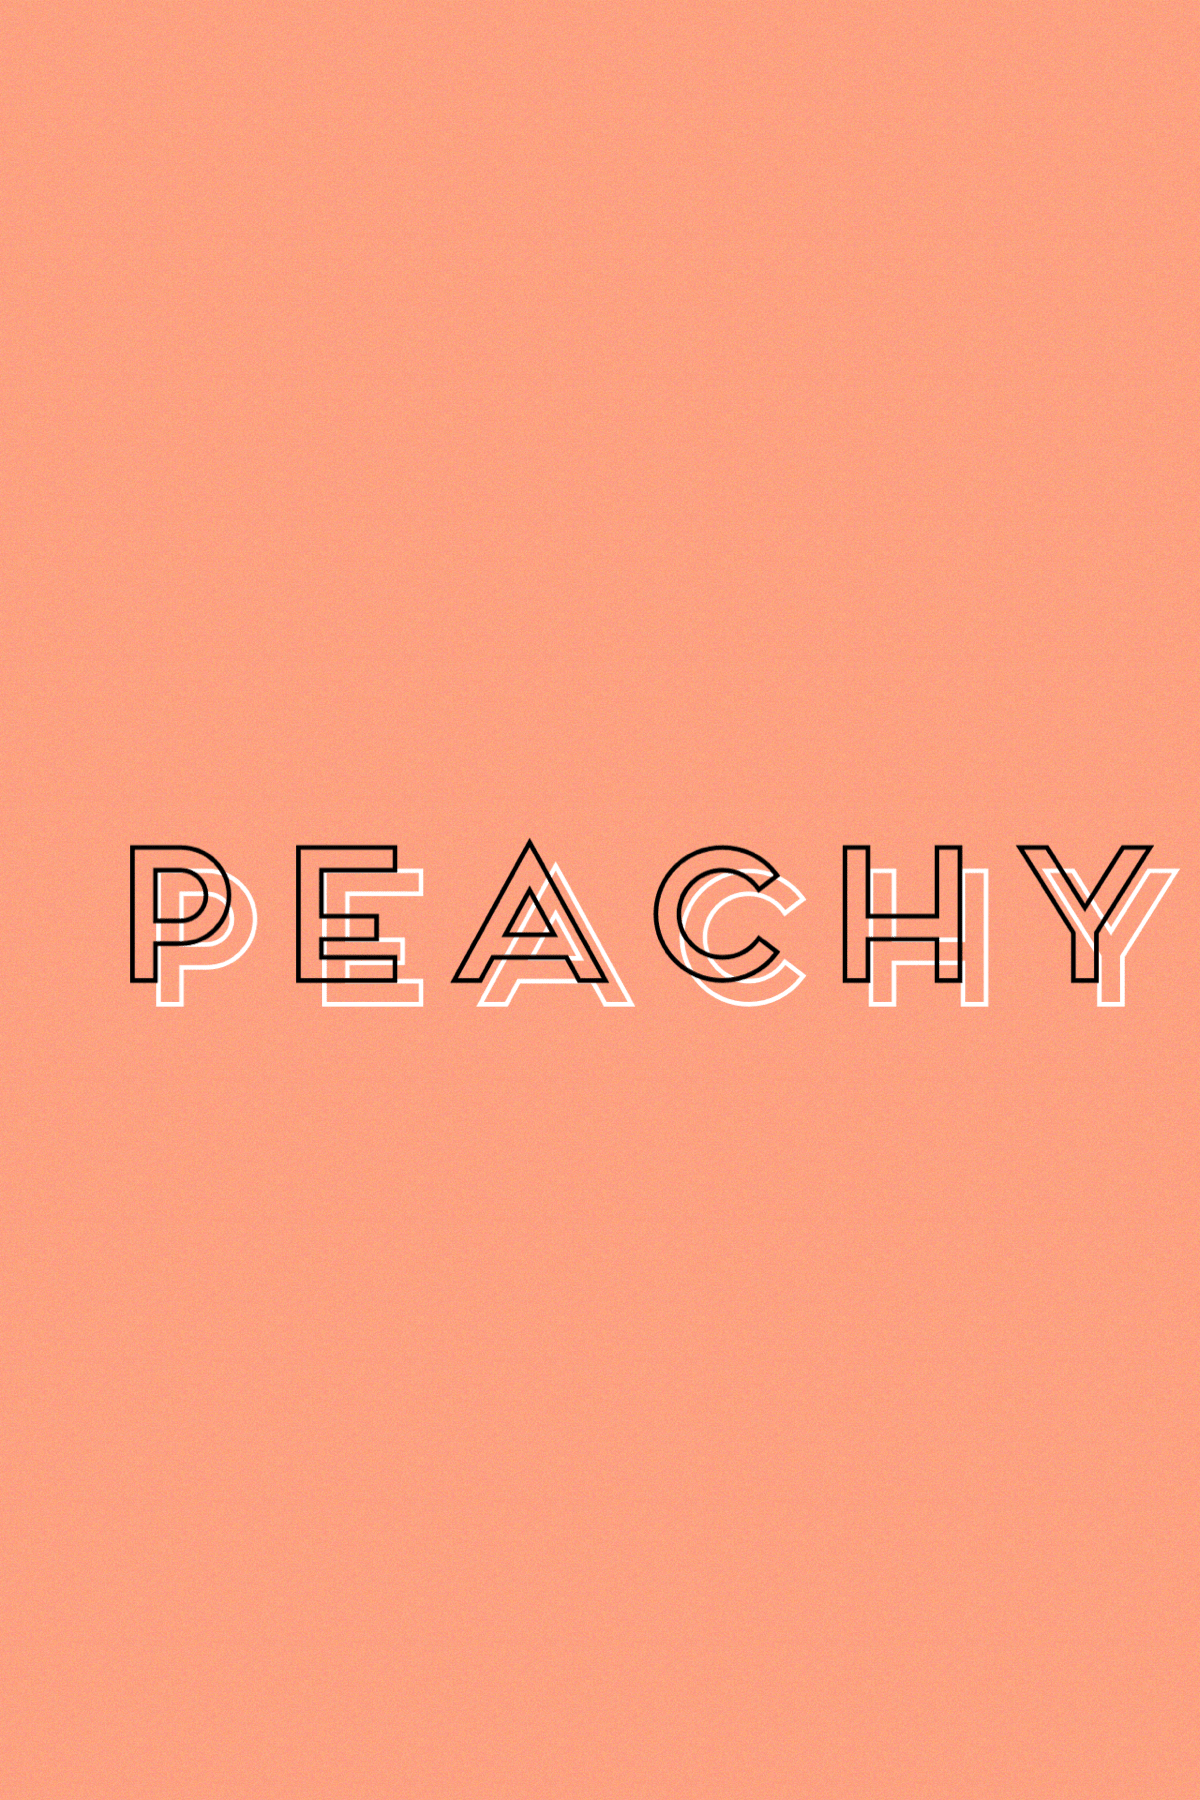 A close up of the word peachy on an orange background - Peach